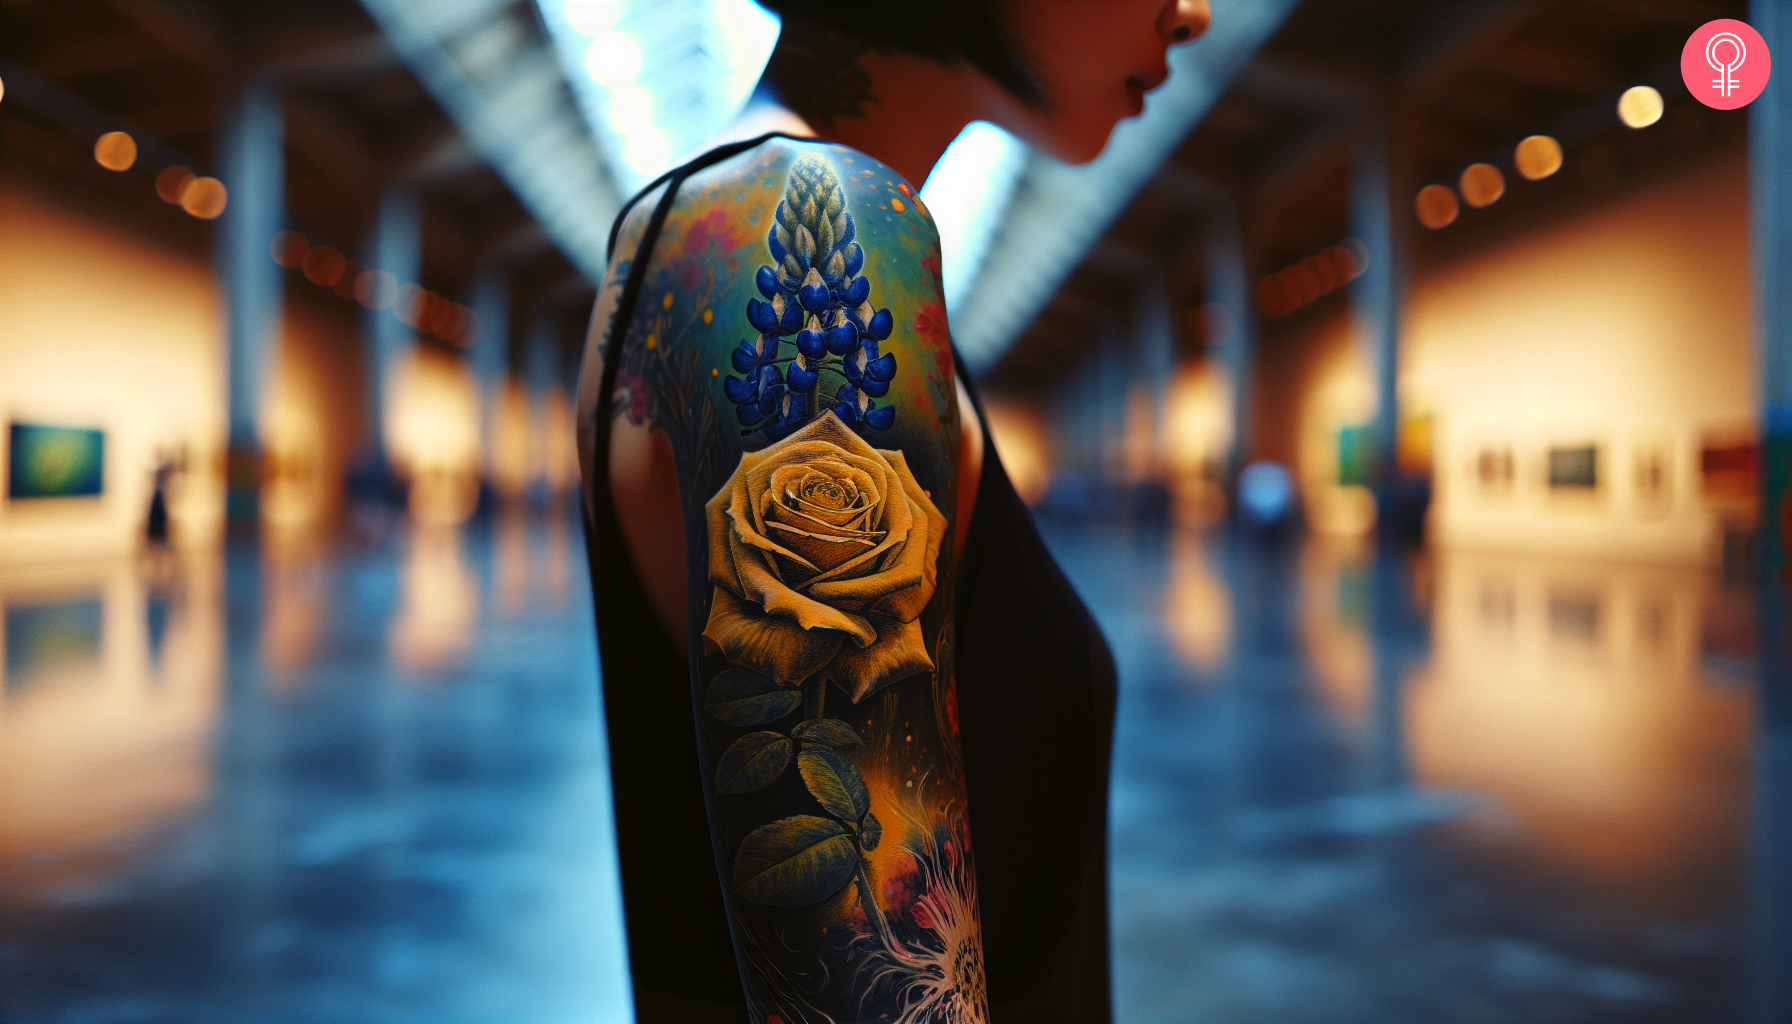 Yellow rose and bluebonnet tattoo on the arm of a woman